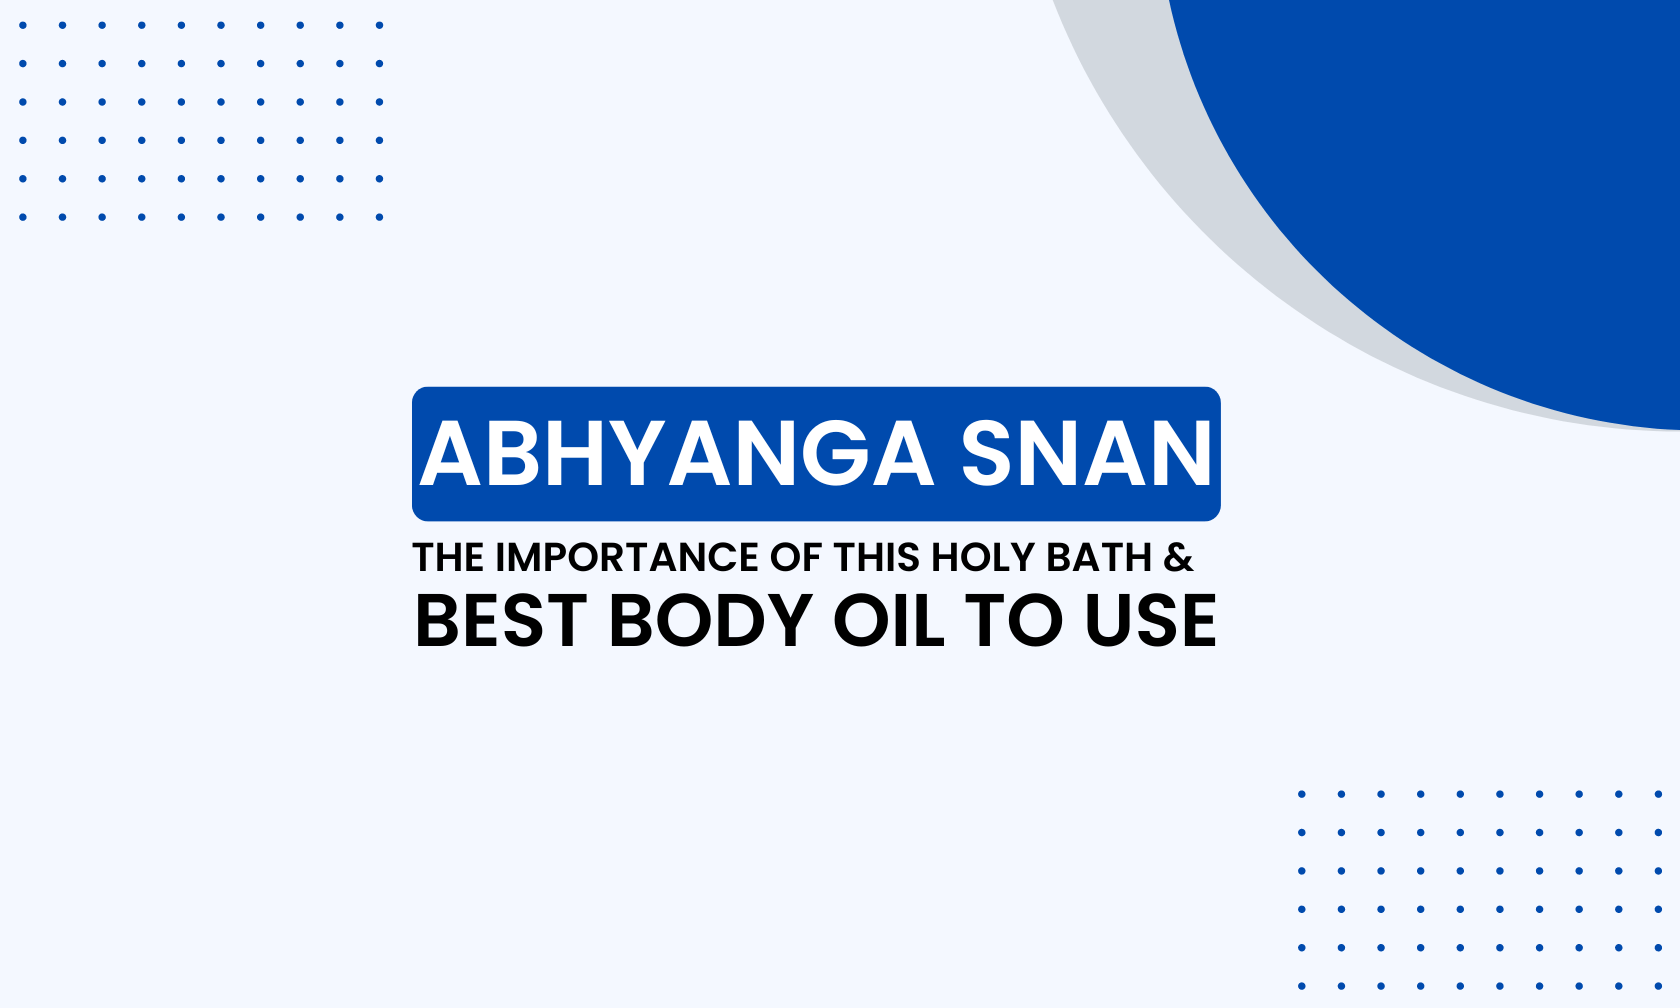 Abhyanga Snan – the importance of this holy bath & best body oil to use for abhyanga snan